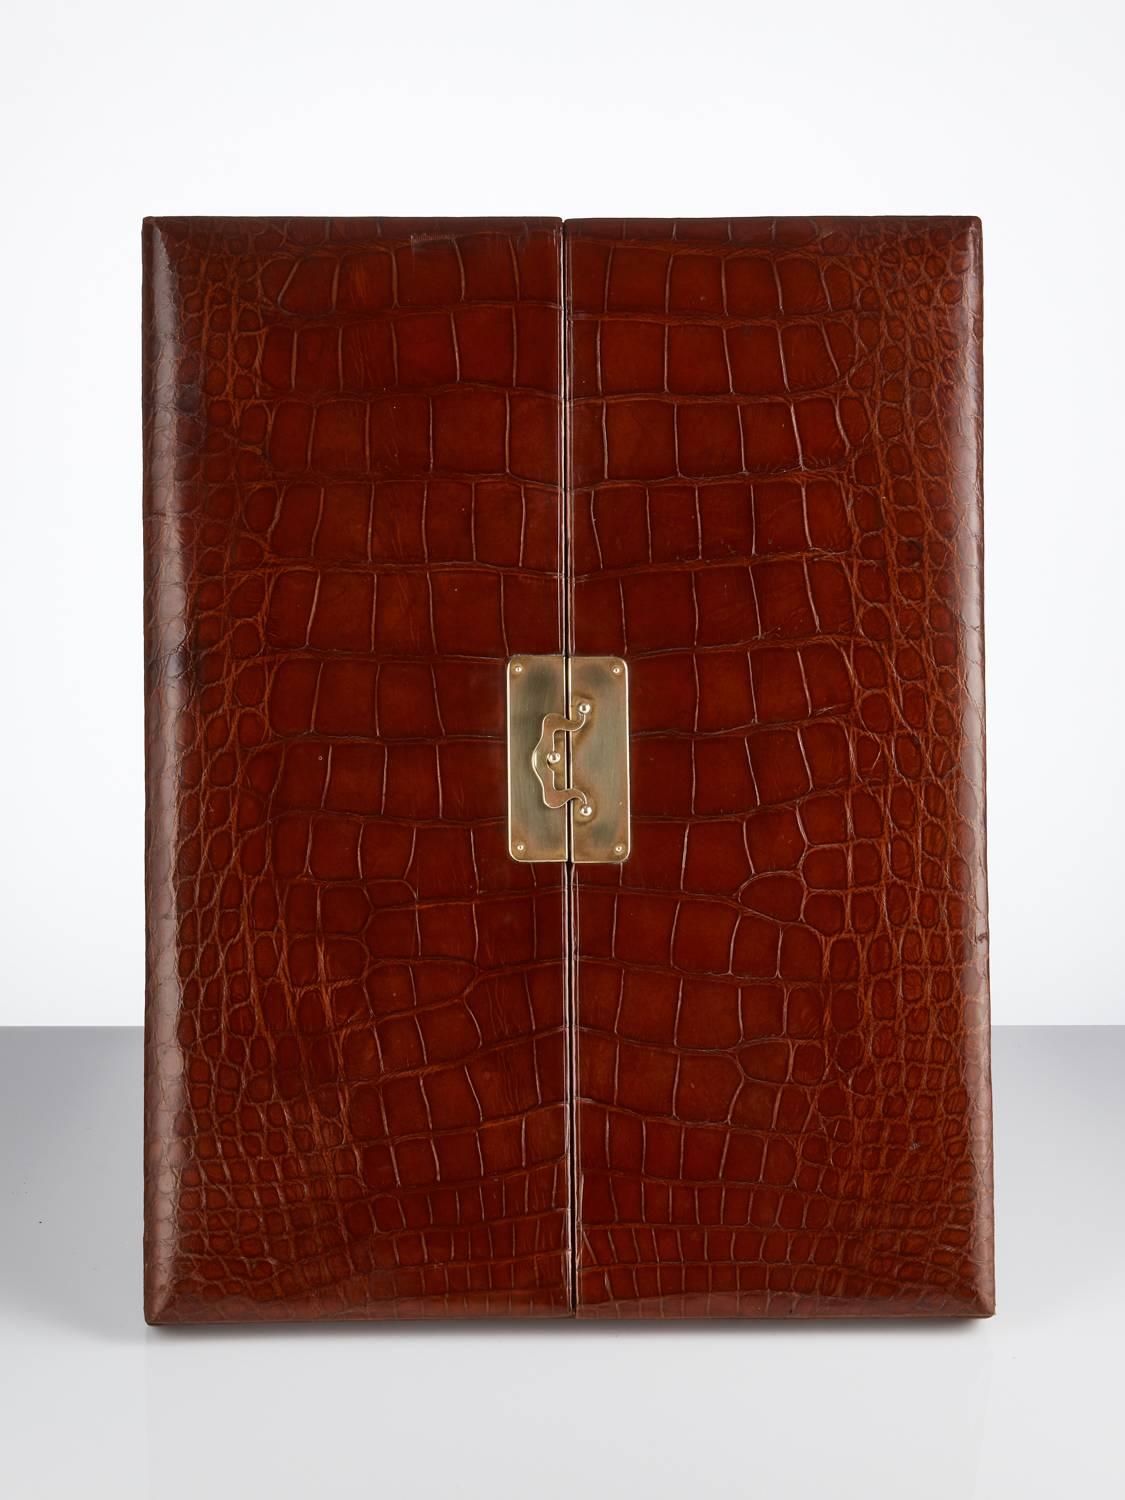 Large early 20th century folding crocodile photograph frame, circa 1920
This piece is in excellent condition and the crocodile retains its original patina.
When opened it appears unused as both leather and silk are in perfect condition.
Also